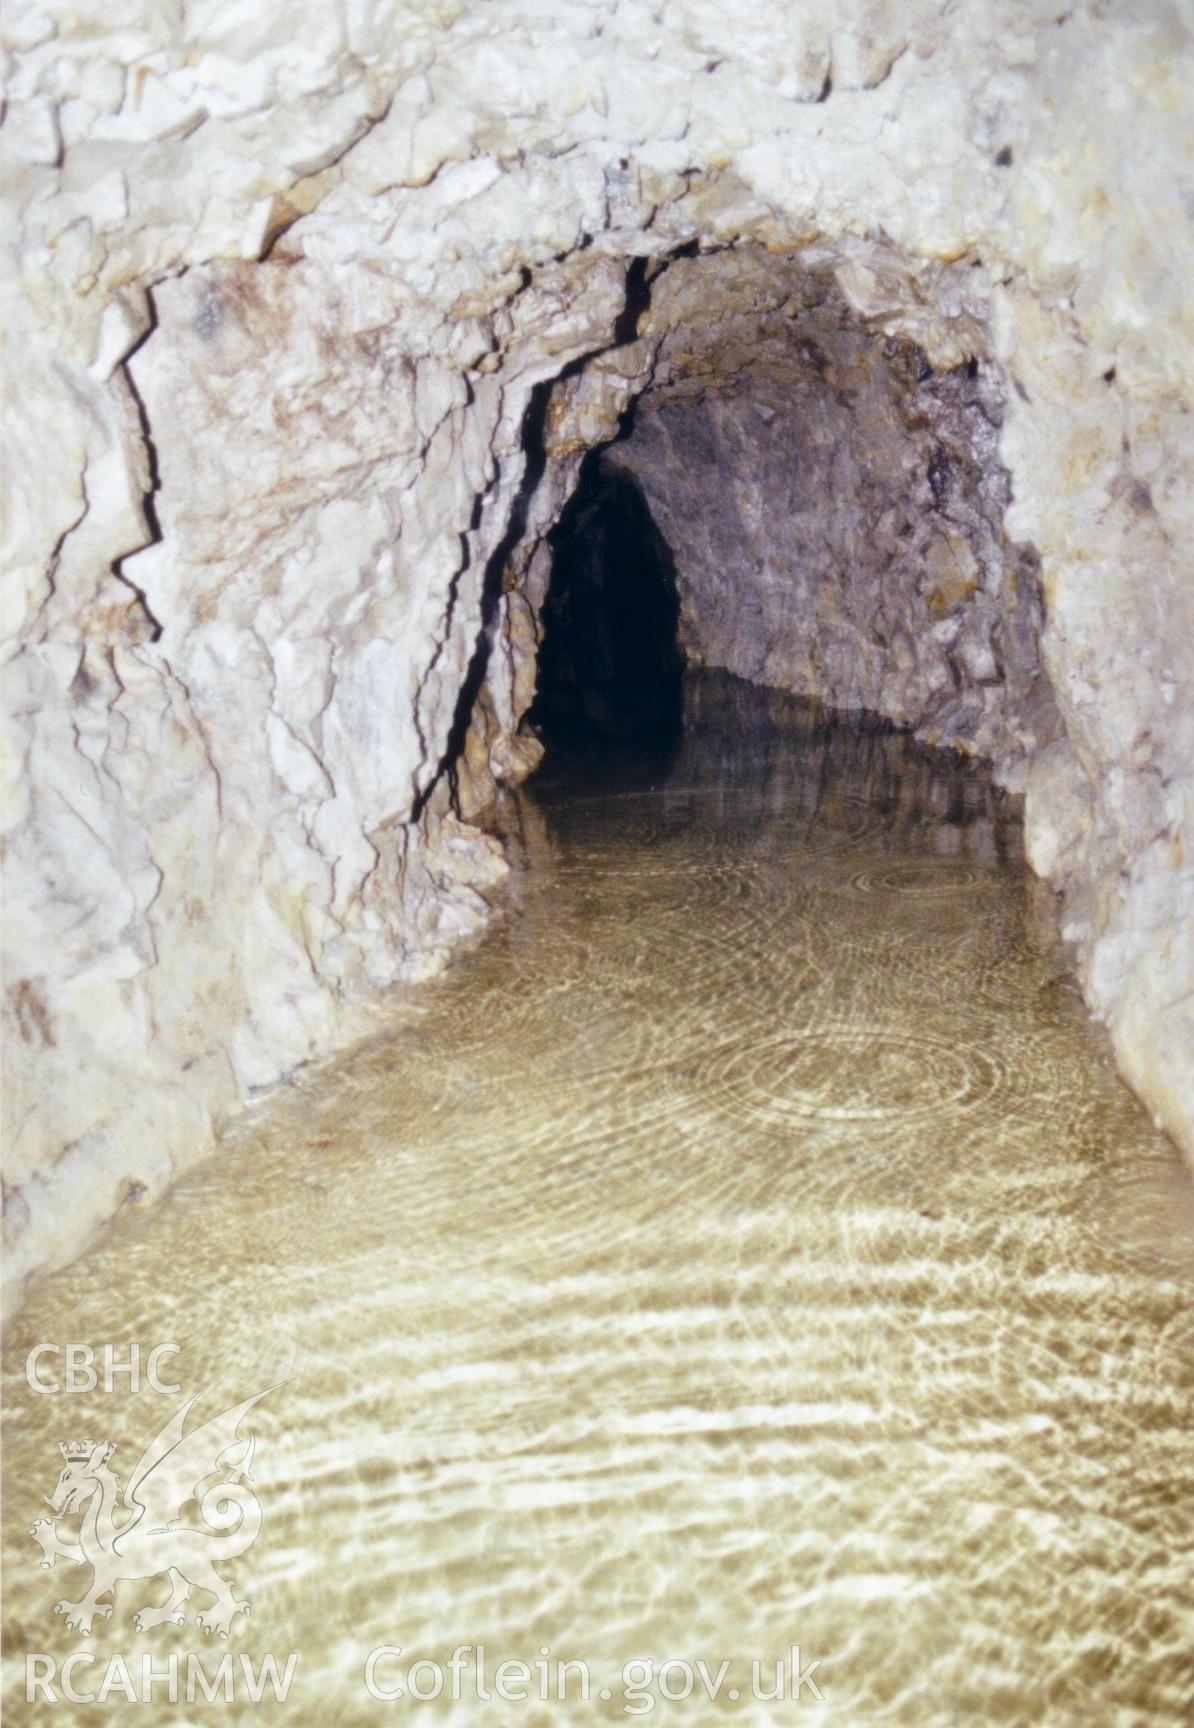 Interior of Level y Ffordd adit showing submeged section.